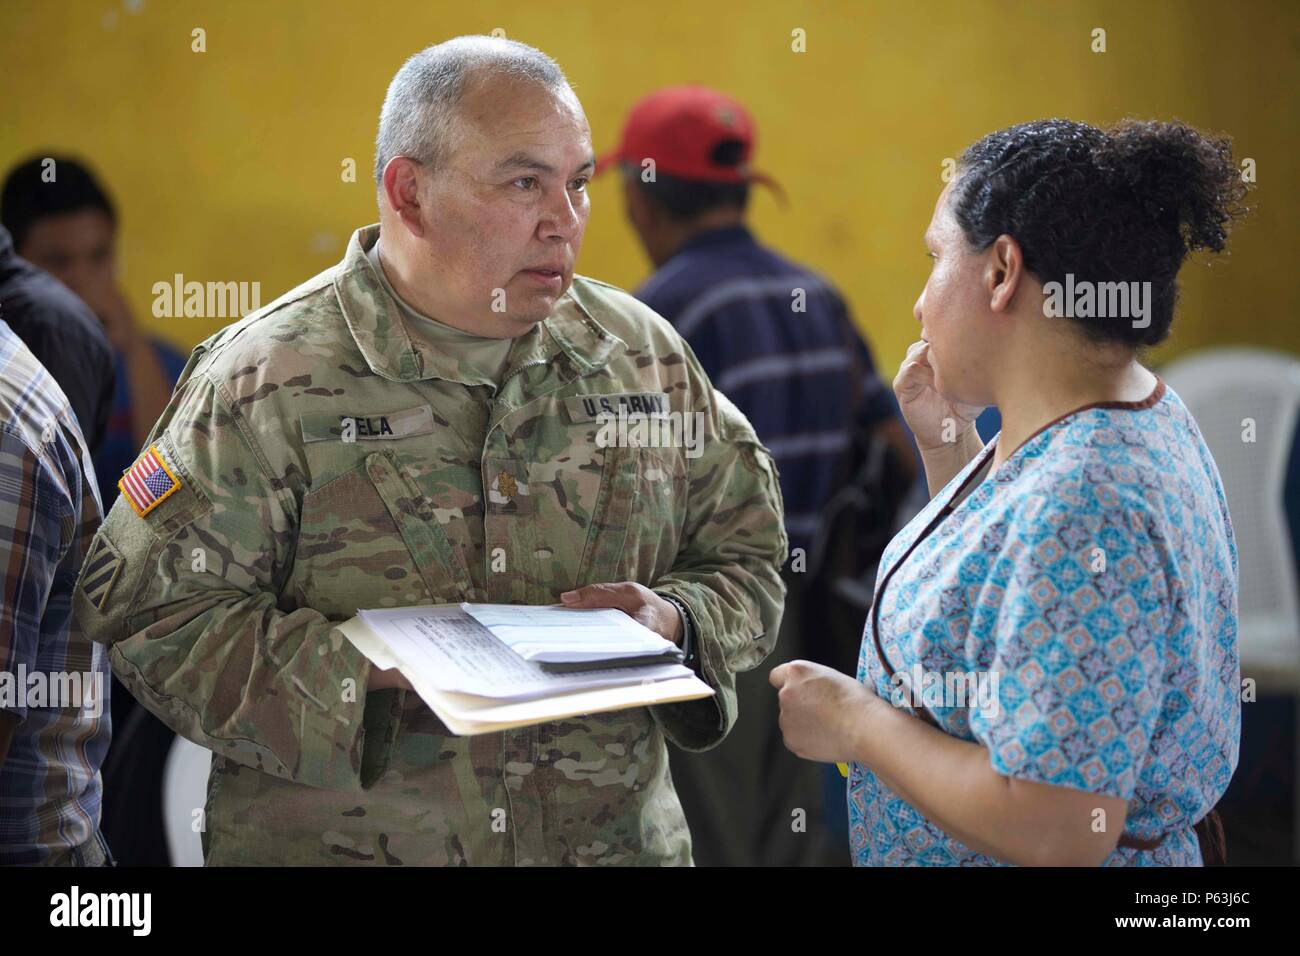 U.S. Army Maj. Edward Vela from the 413th Civil Affairs Battalion talks with a Guatemalan citizen informing her about the upcoming Medical Readiness Exercise as part of the Beyond The Horizon Operation at San Pablo, Guatemala, April 29, 2016. Task Force Red Wolf and Army South conducts Humanitarian Civil Assistance Training to include tactical level construction projects and Medical Readiness Training Exercises providing medical access and building schools in Guatemala with the Guatemalan Government and non-government agencies from 05MAR16 to 18JUN16 in order to improve the mission readiness o Stock Photo